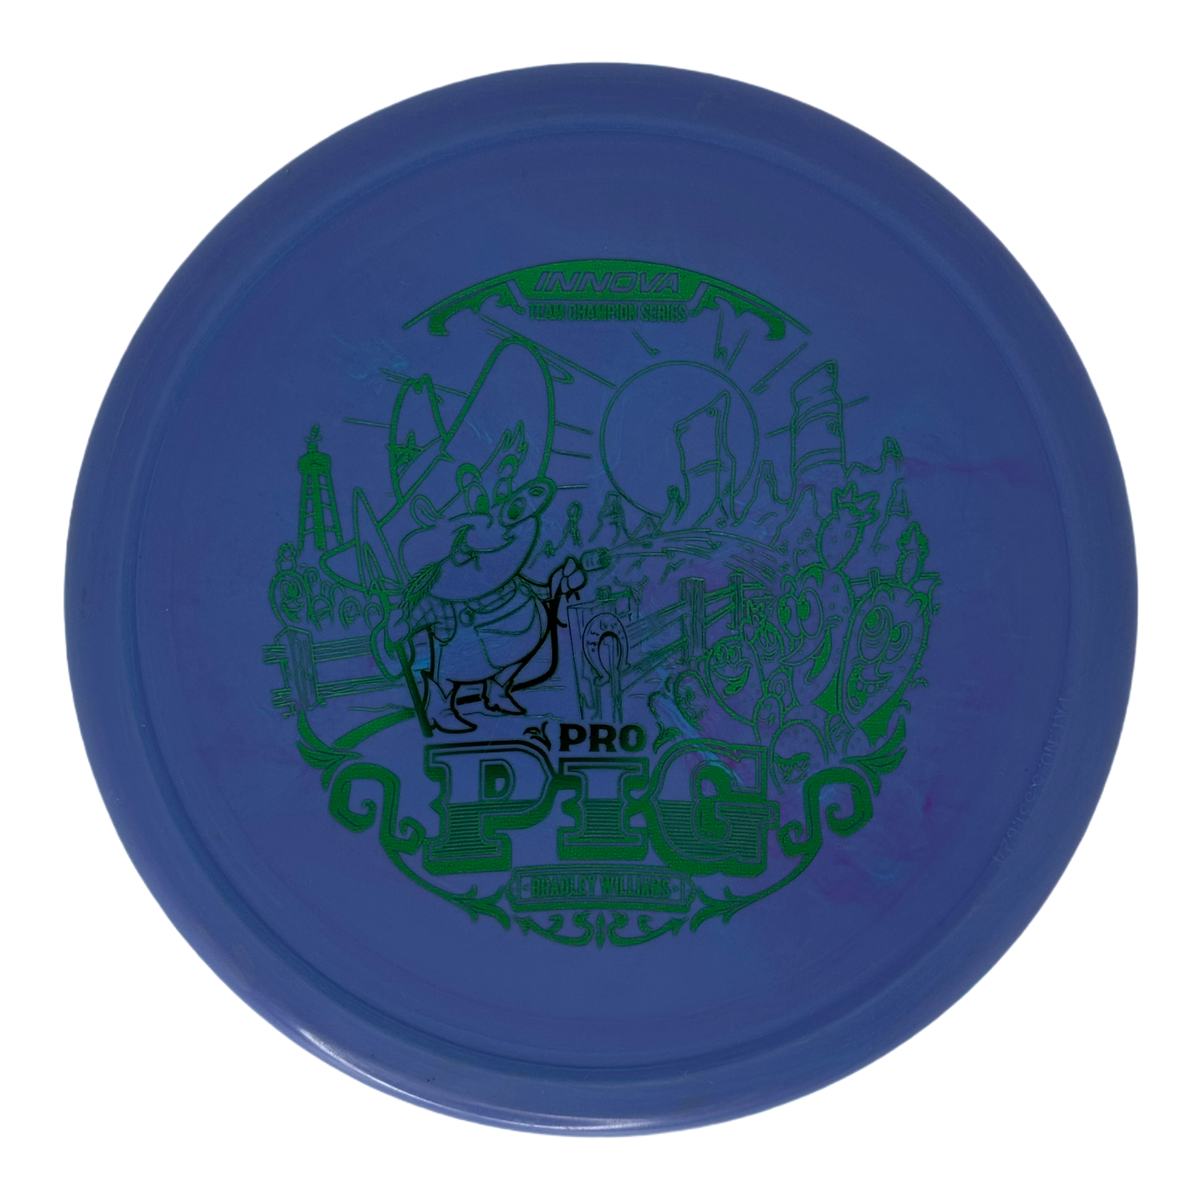 Innova Pre-Owned Approach &amp; Midranges